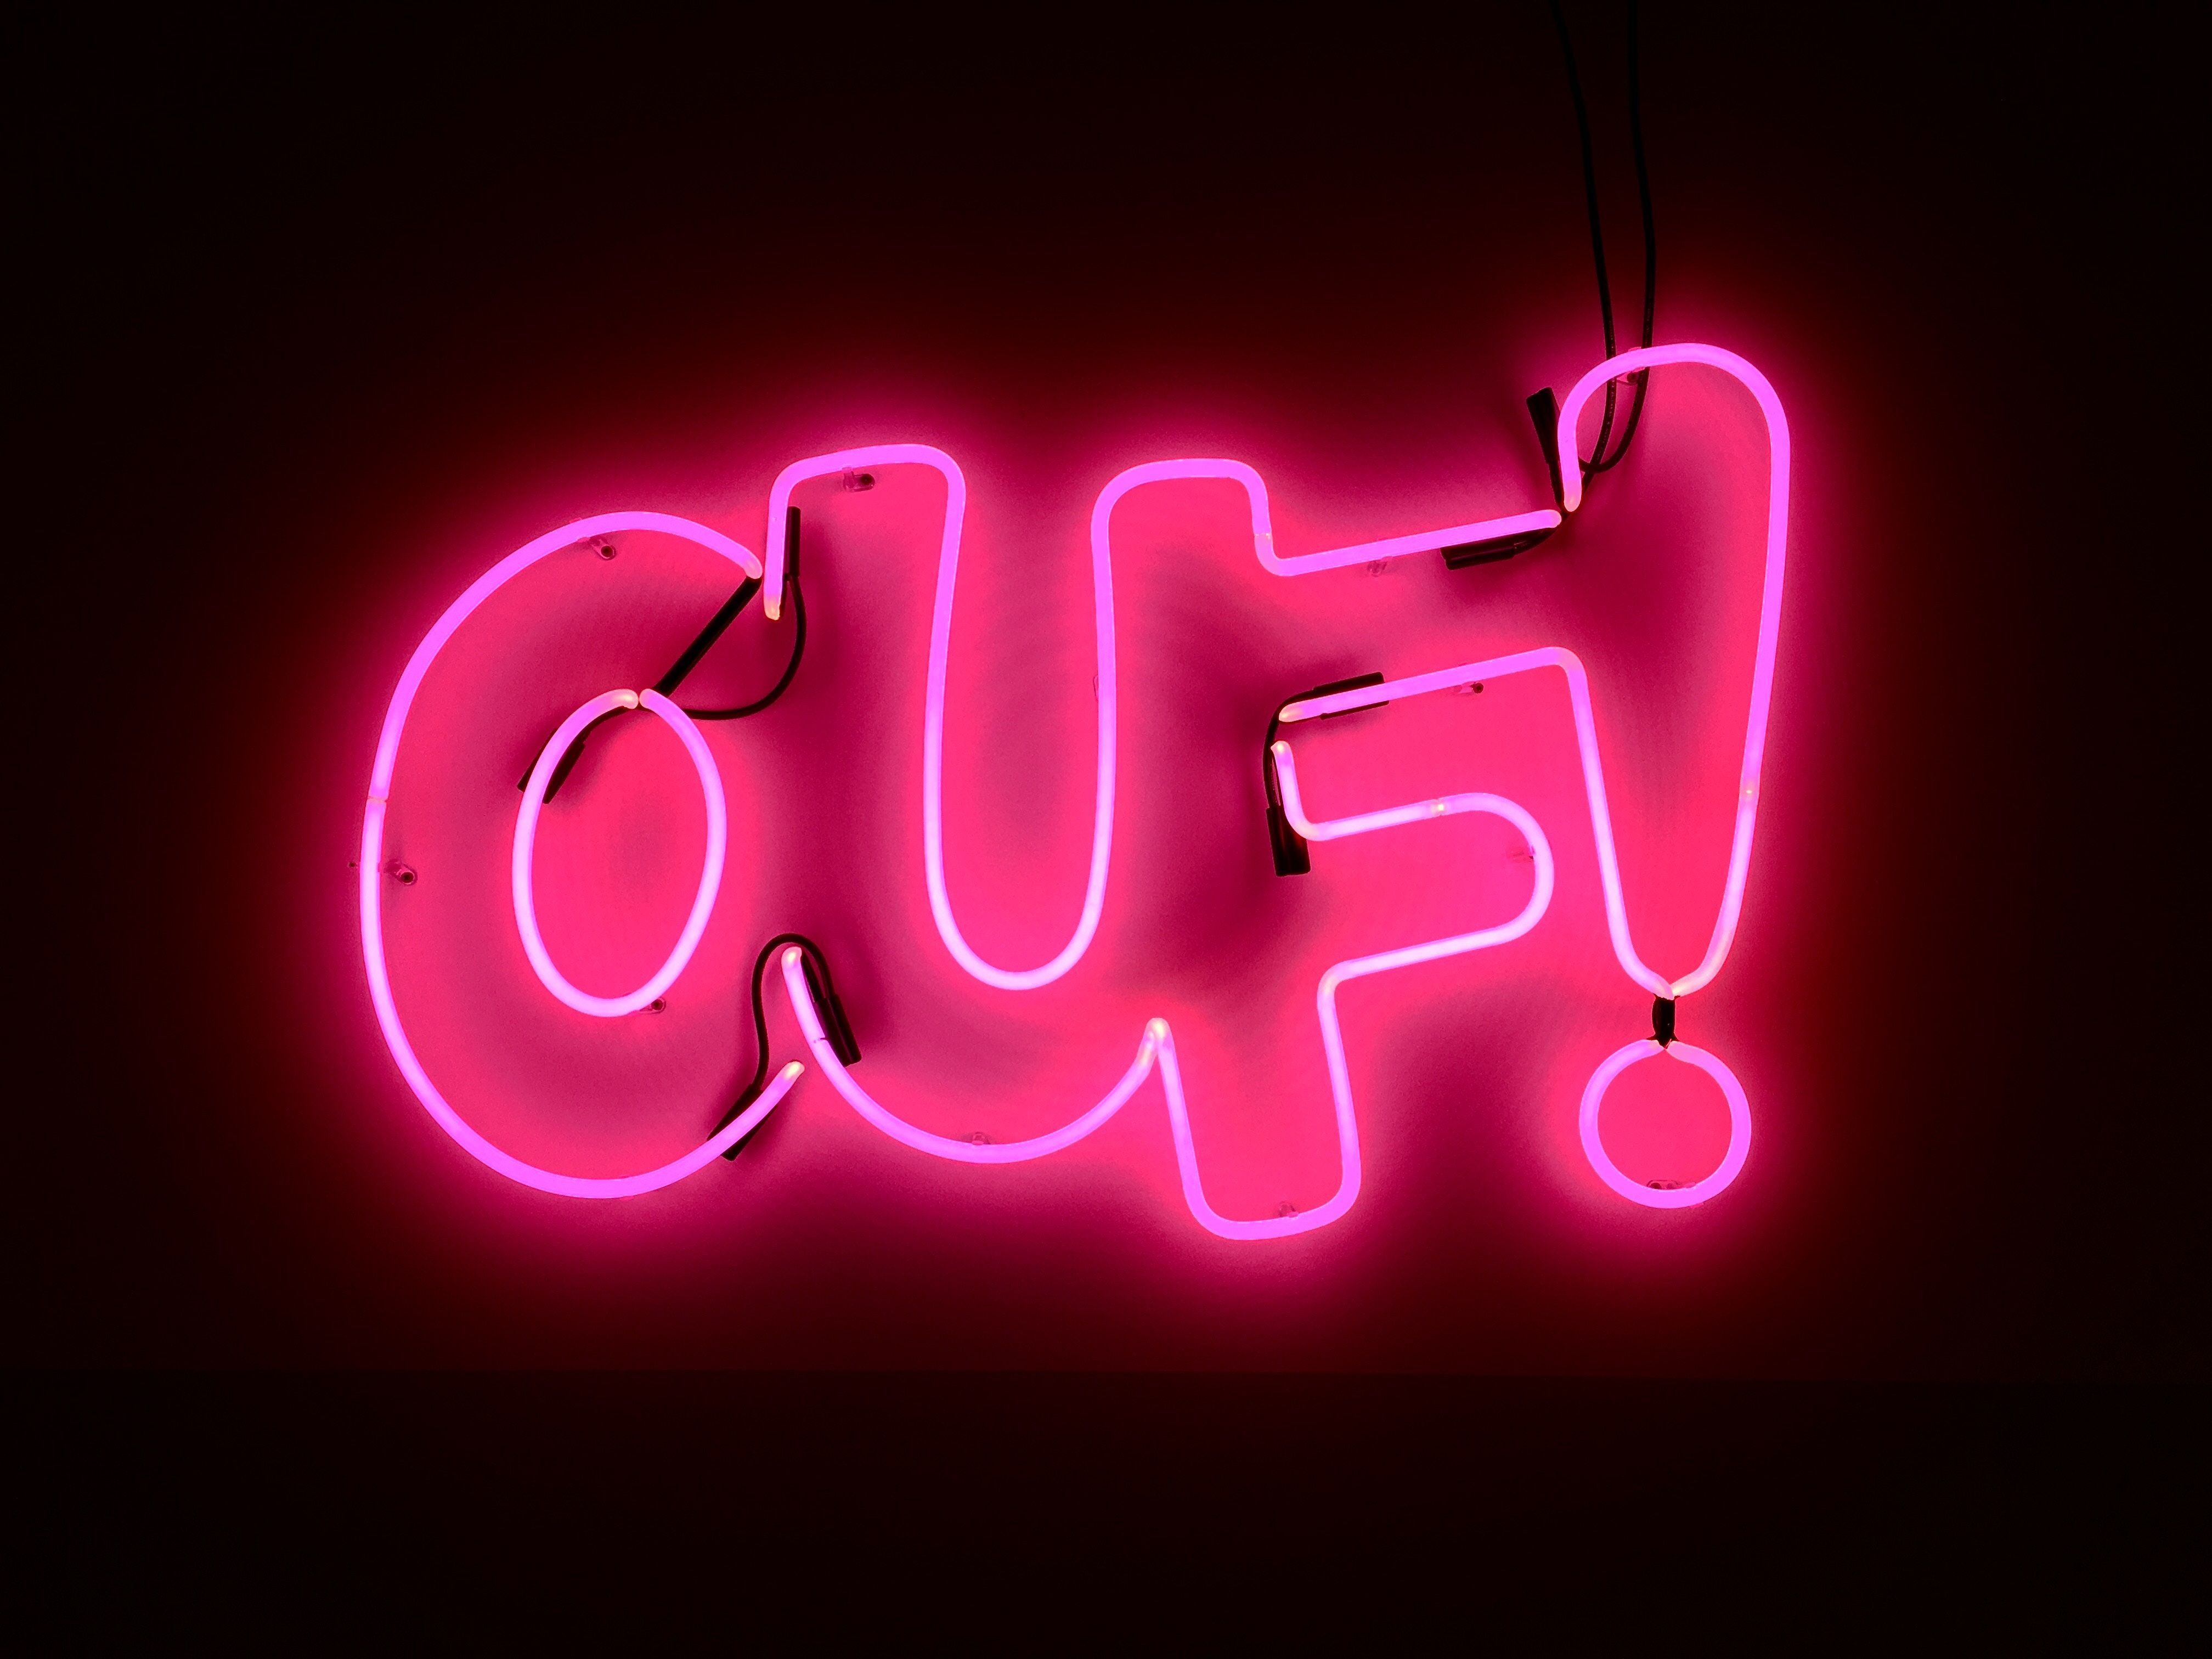 4032x3024 #fou, #neon, #dark, #verlan, #electric, #text, #light, #glow, #club, #funny background, #pink, #Public domain image, #funny wallpaper, #black background, #exclaim, #fluo, #bright, #contrast, #ouf, # wallpaper, #sign. Mocah.org HD